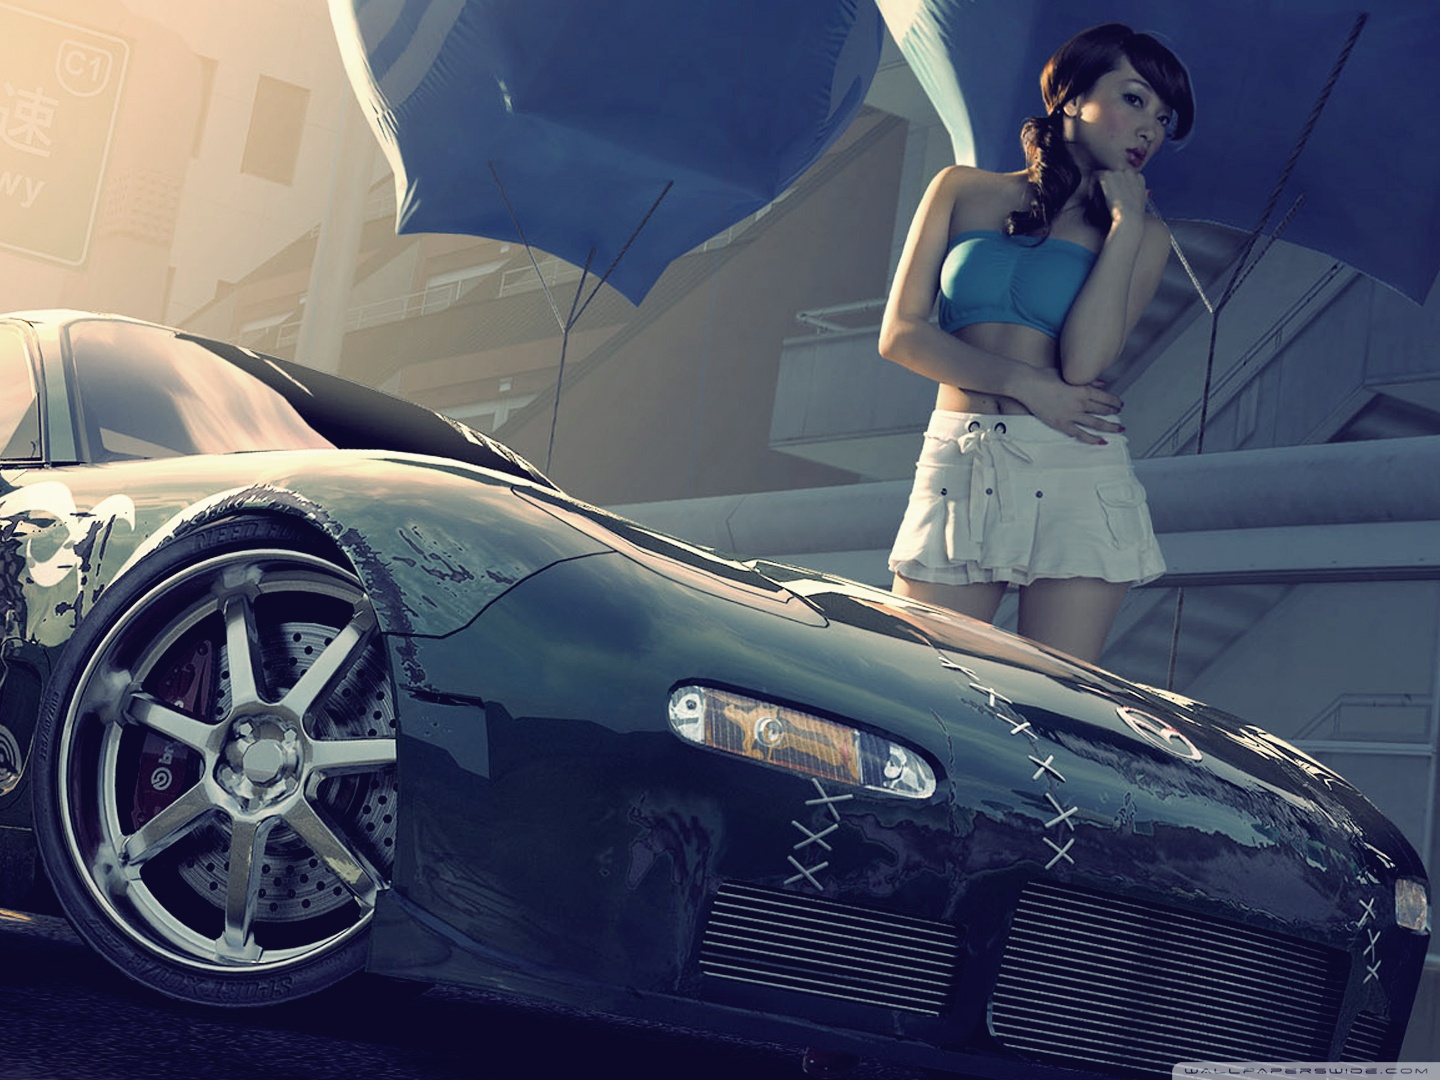 Need for Speed: ProStreet Wallpapers